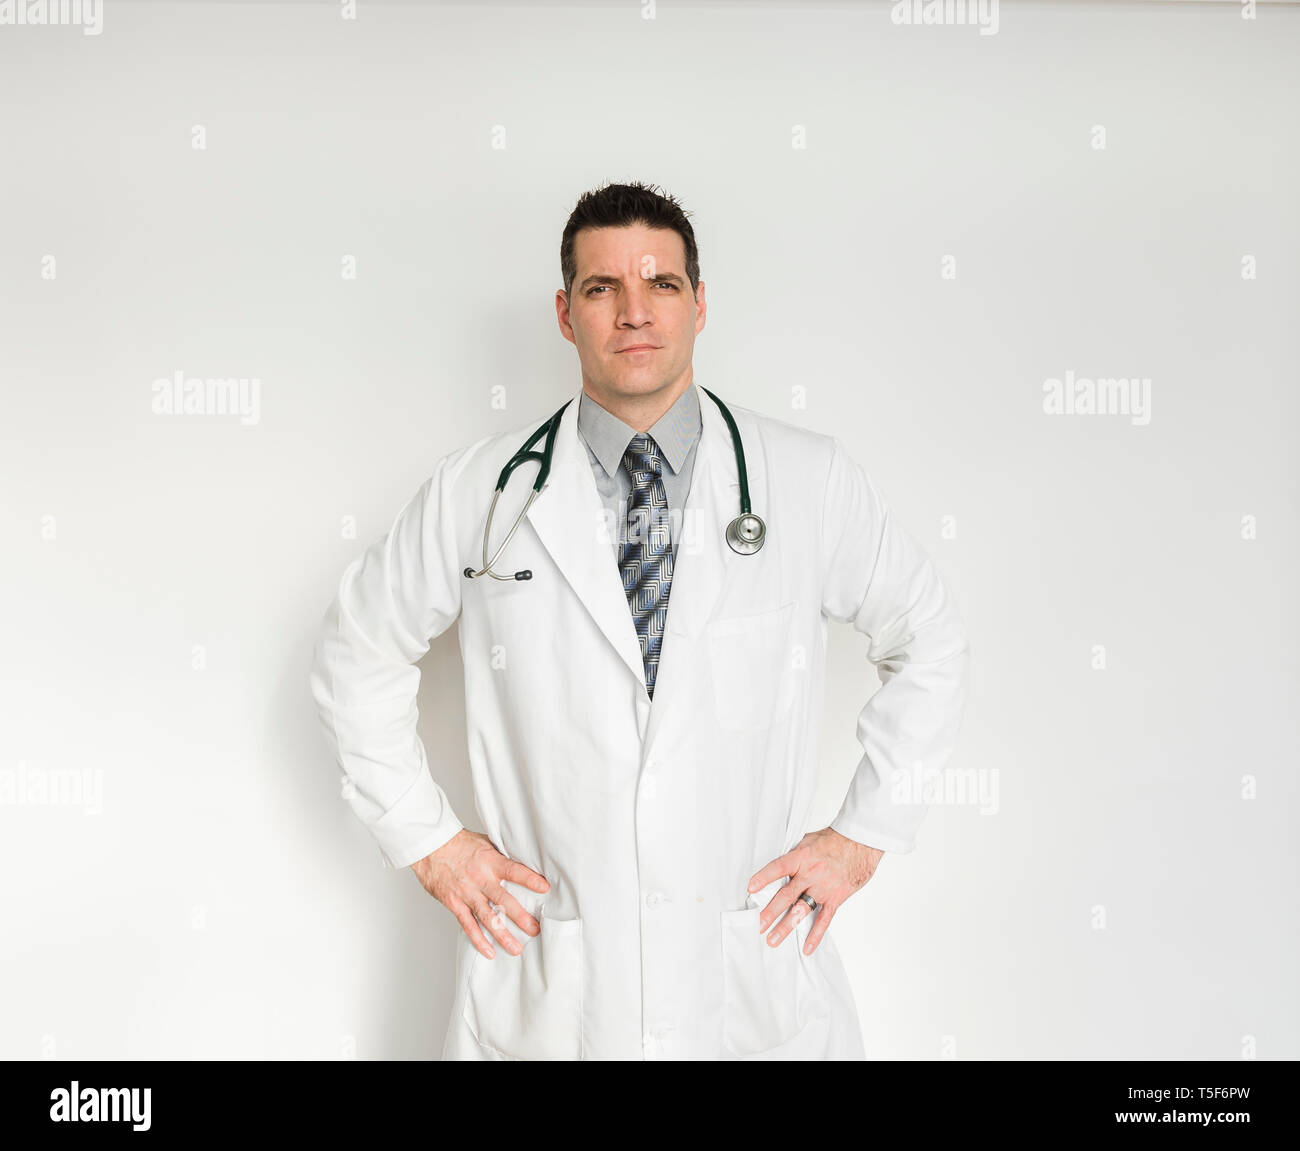 Medical doctor in lab coat standing with hands on hips. Stock Photo